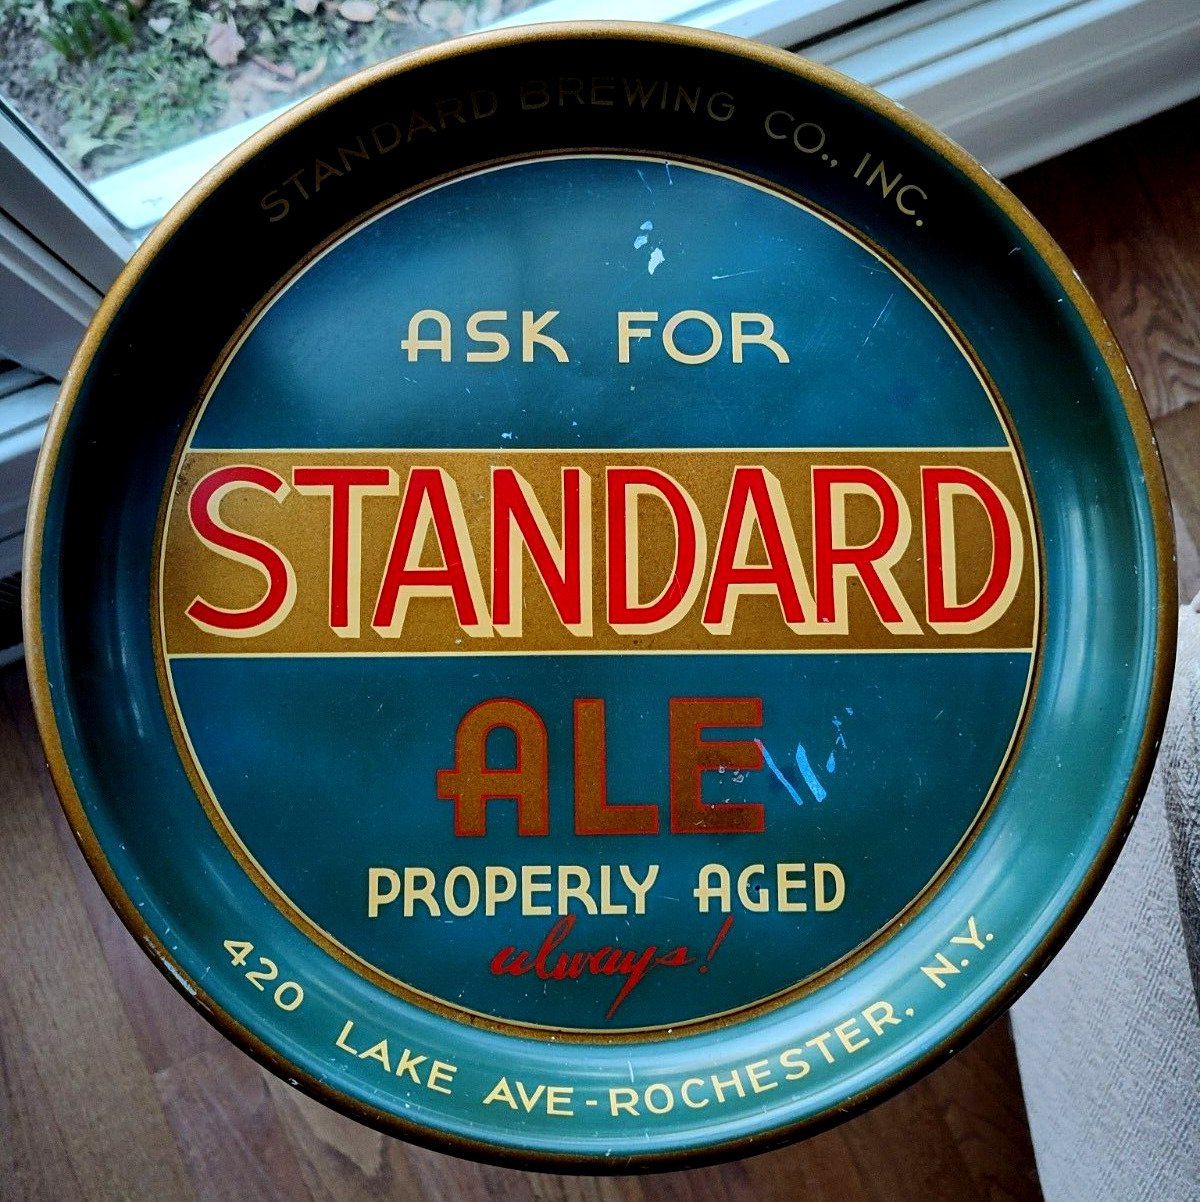 Vintage Standard Brewing Company Rochester NY Standard Ale Beer Tray